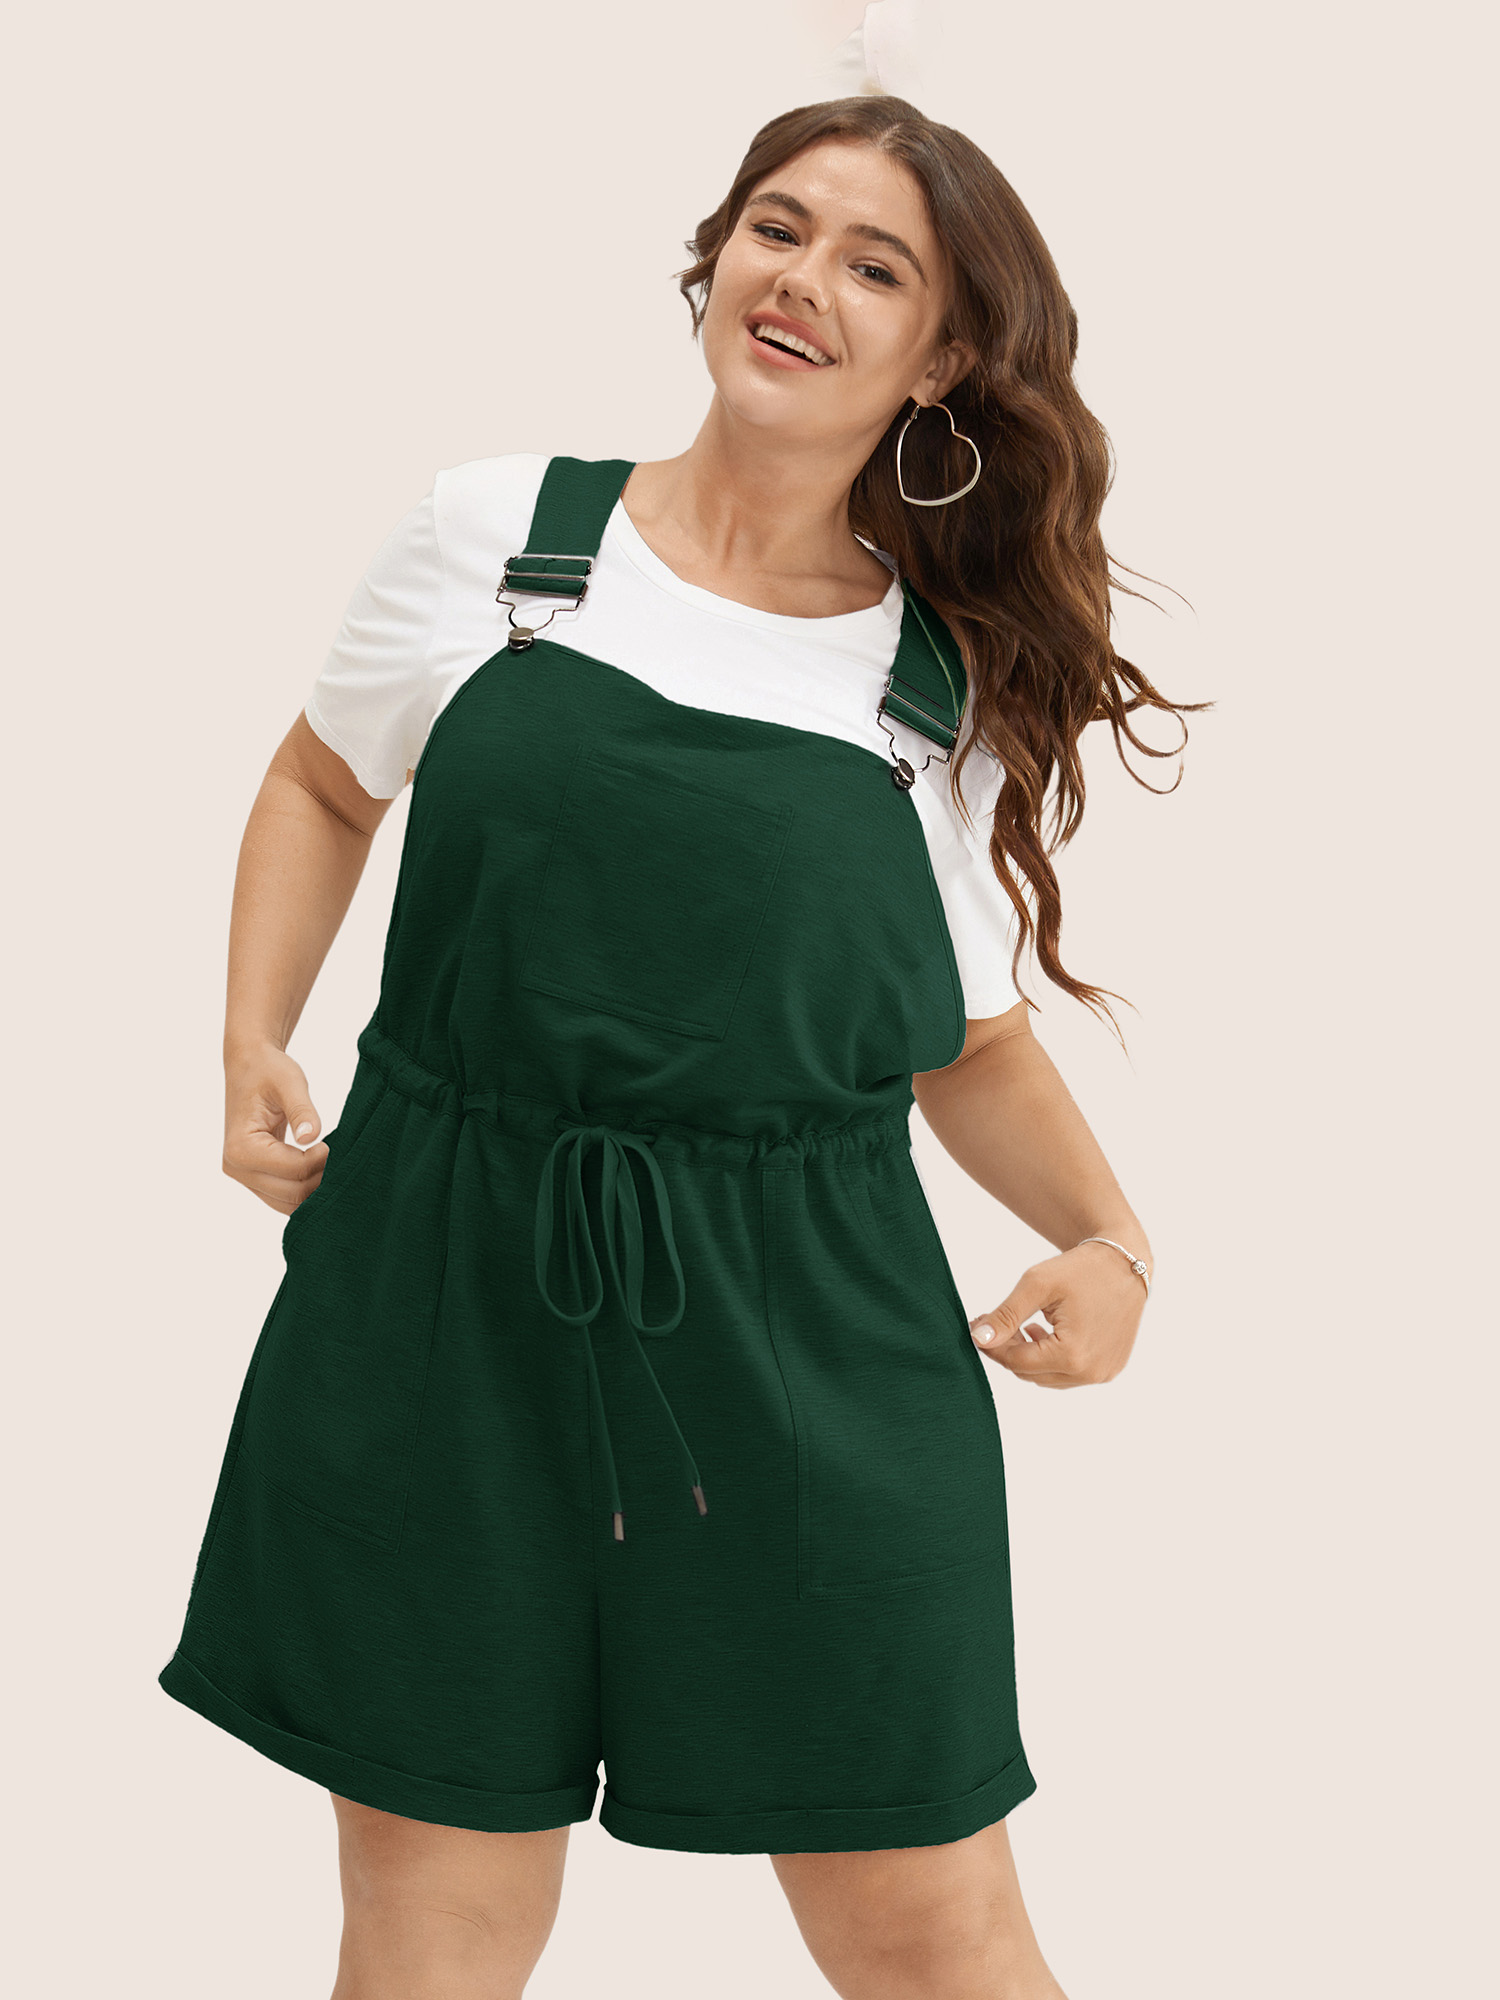 

Plus Size DarkGreen Solid Pocket Drawstring Overall Romper Women Casual Sleeveless Non Everyday Loose Jumpsuits BloomChic